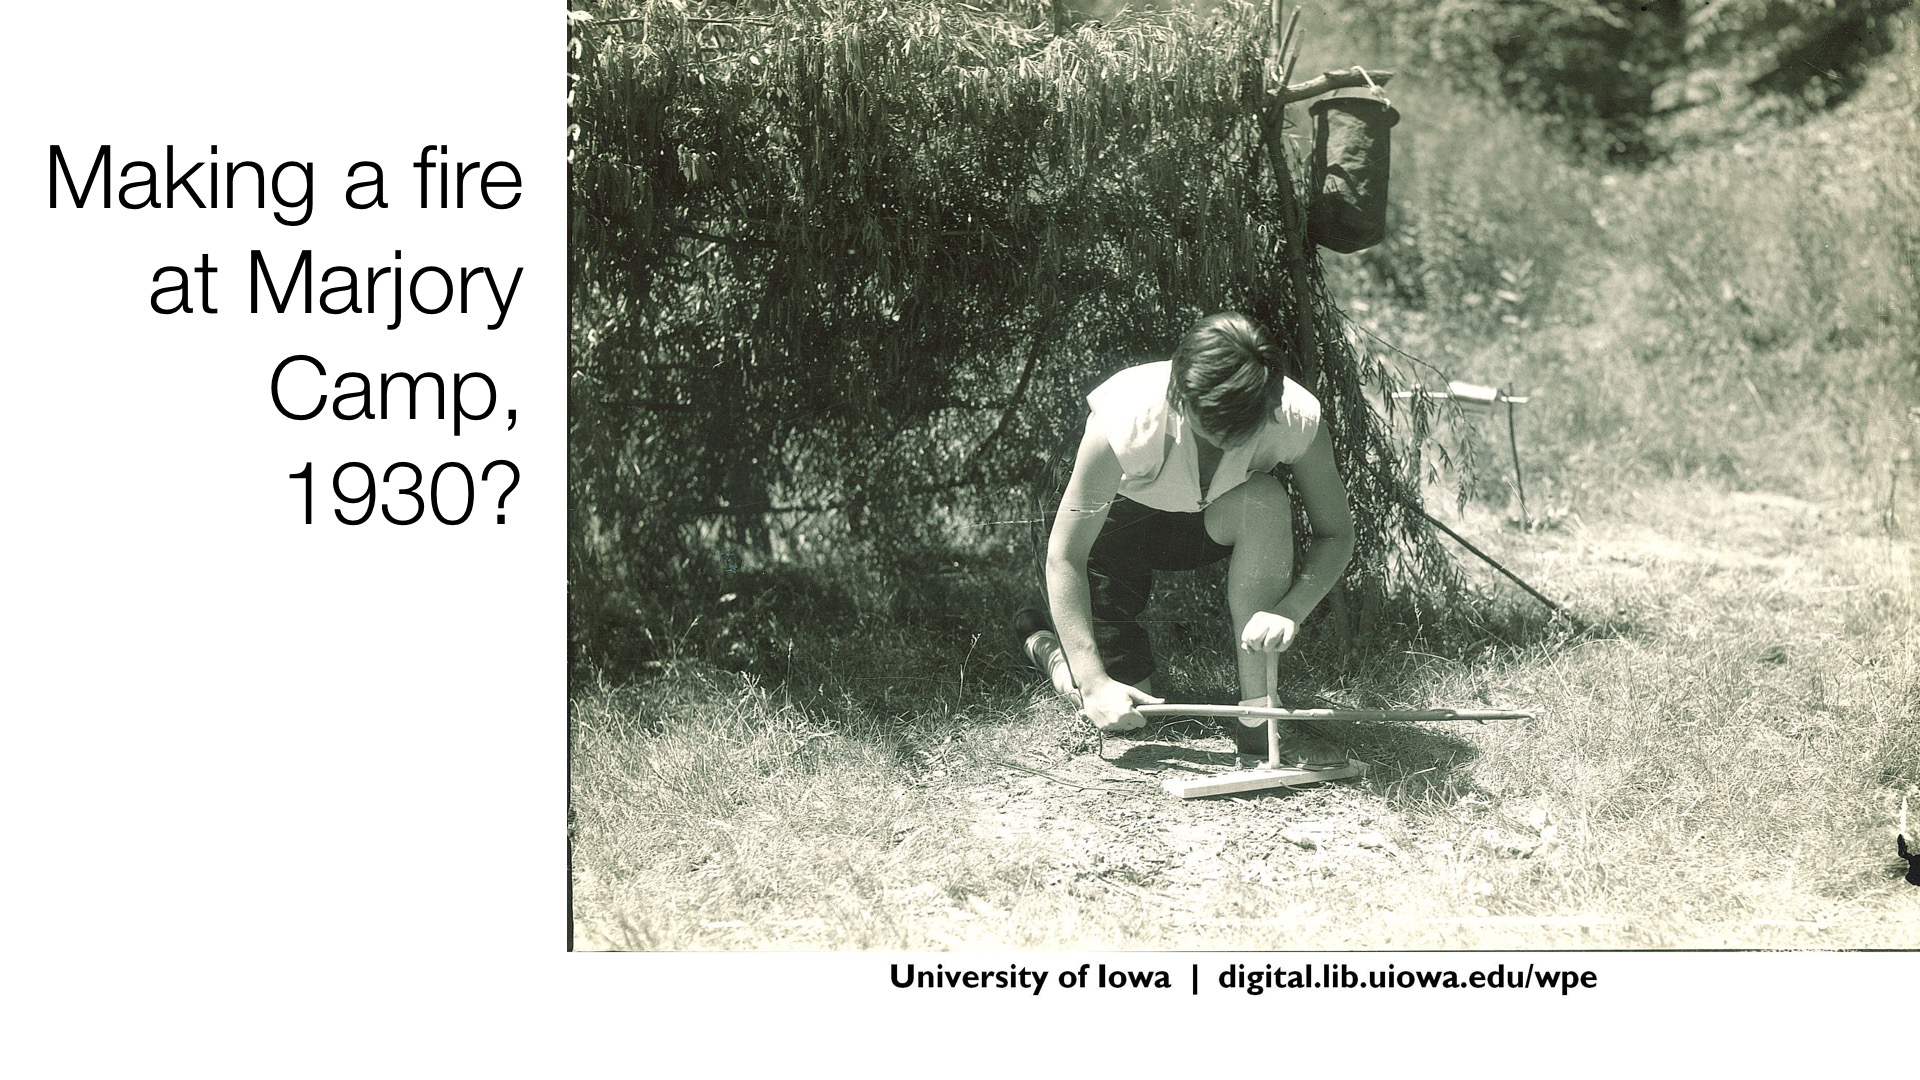 Making a fire at Marjory Camp 1930?